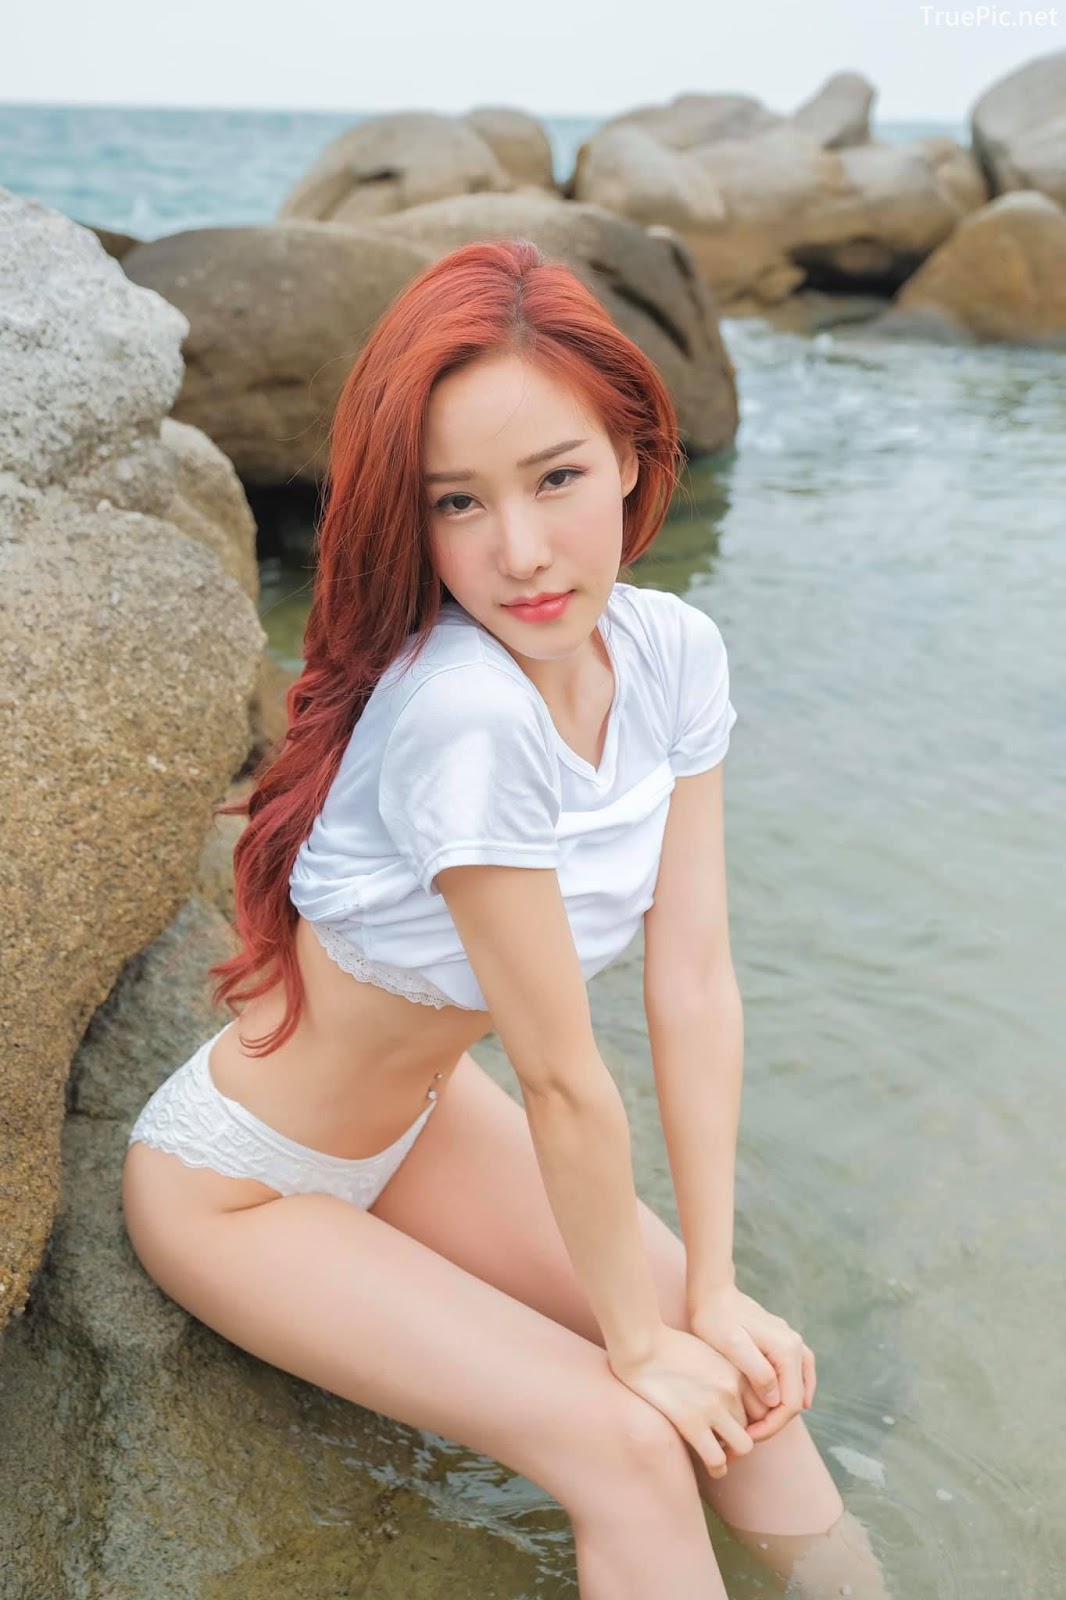 Thailand sexy model Arys Nam-in (Arysiacara) – The goddess of the sea - Picture 32